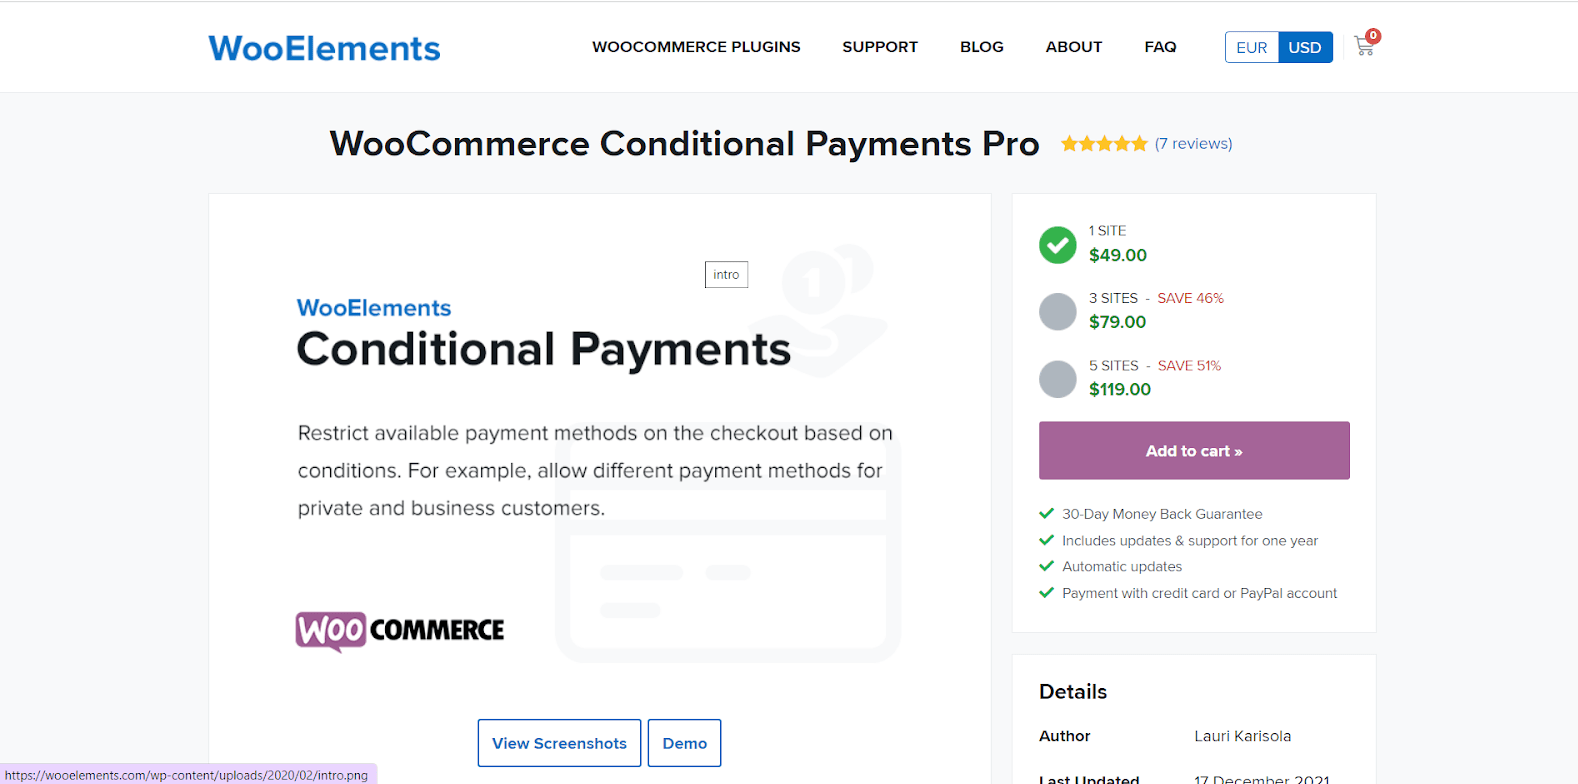 WooCommerce Conditional Payments Pro